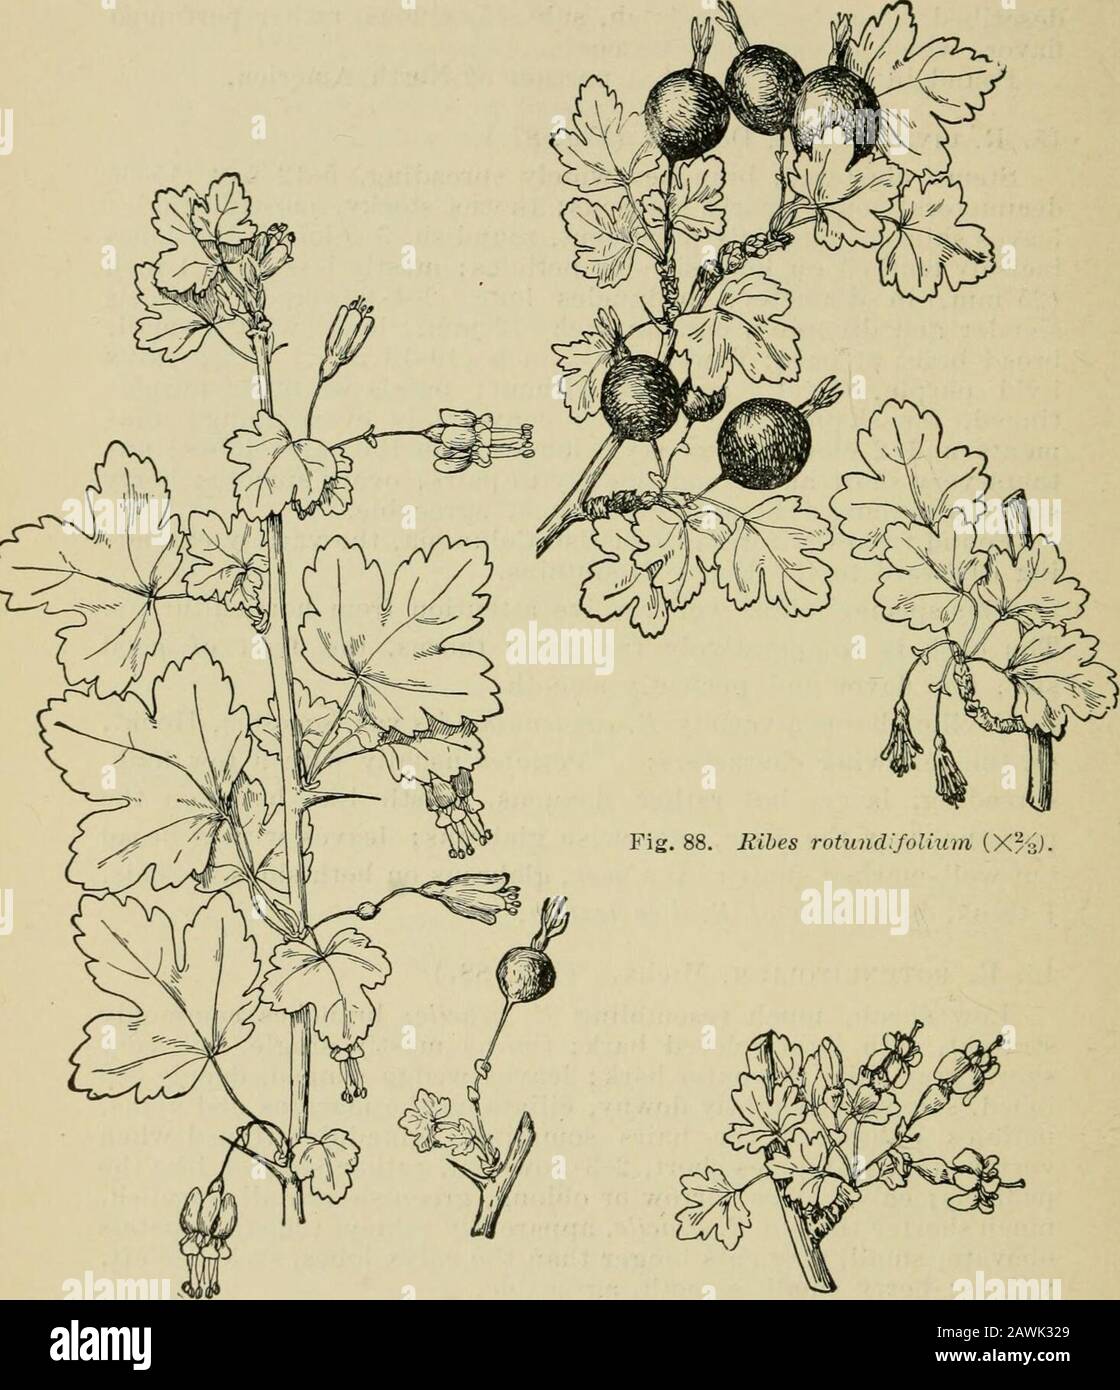 Bush-fruits; a horticultural monograph of raspberries, blackberries, dewberries, currants, gooseberries, and other shrub-like fruits . ding, large, but rather flexuous, bristle-like hairs on themargins near the base, otherwise glabrous; leaves with a broadbut well-marked sinus at the base, glabrous on both sides. This,I think, is a form of B. divaricatum. 16. R. ROTUNDiFOLiUM, Michx. (Fig. 88.) Low shrub, much resembling E. gracile; branches commonlystraight, with light colored bark; thorns mostly single, but veryshort, gray, like the outer bark; leaves wedge-shaped, deeply 3-5lobed, smooth or Stock Photo